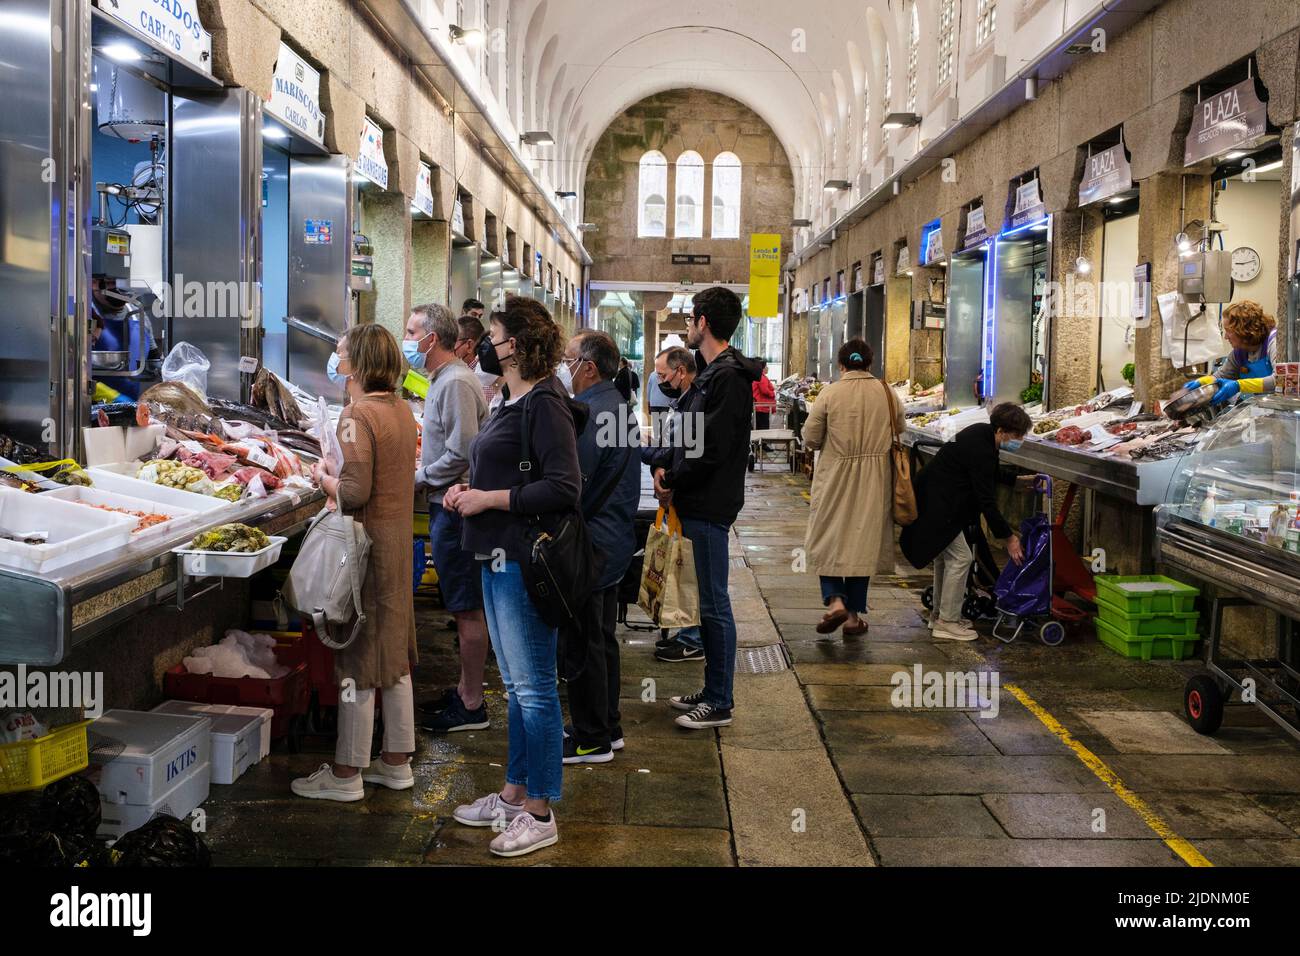 Spain, Santiago de Compostela, Galicia. Customers at a Seafood Vendor's Stand in the Market. Stock Photo